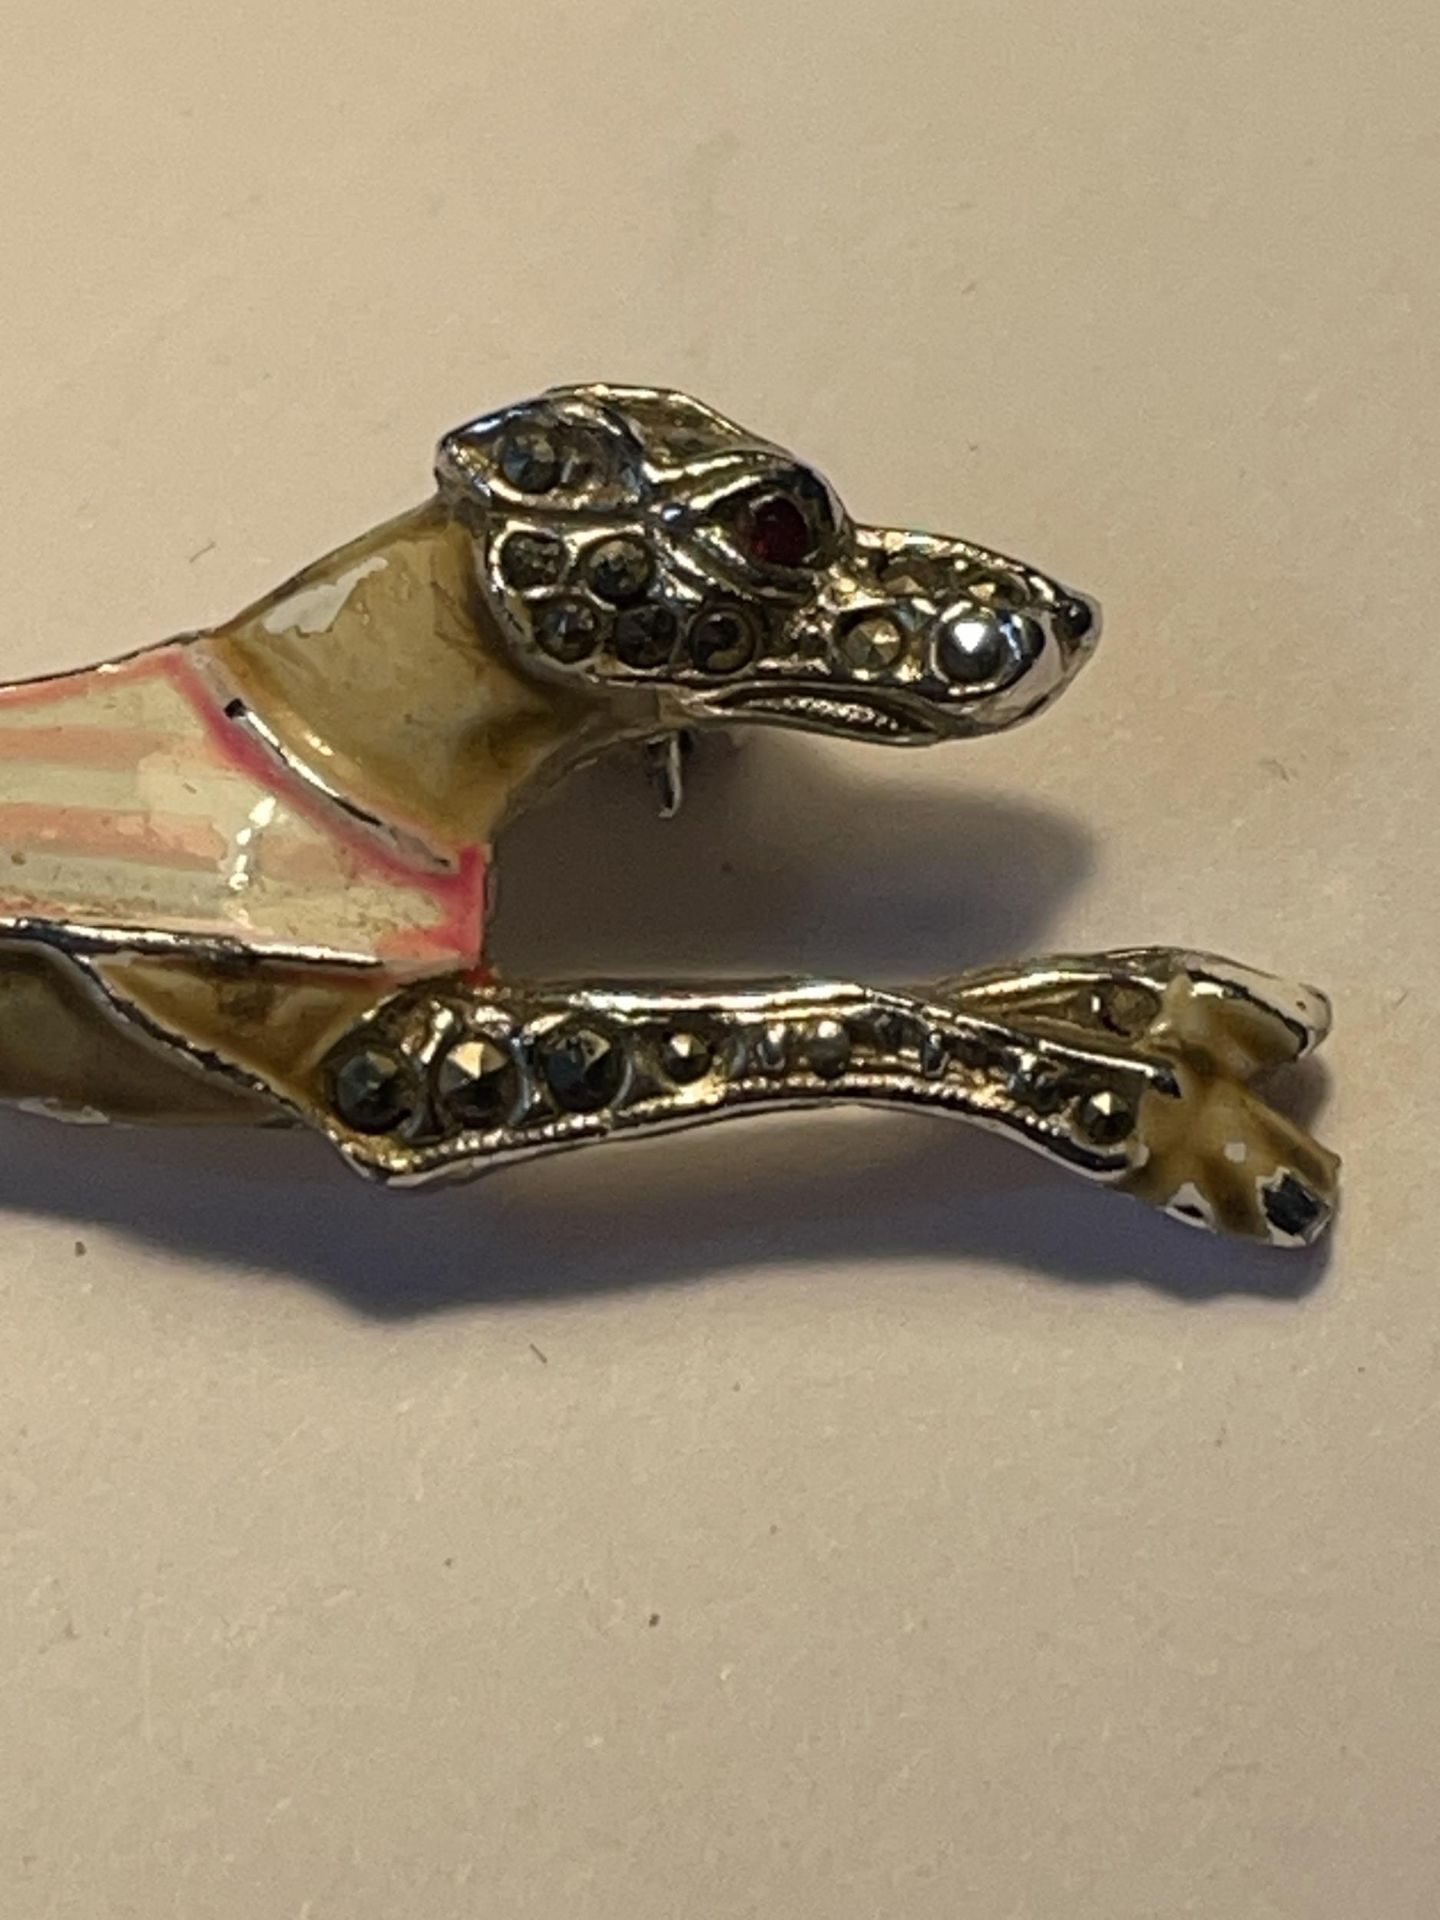 A VINTAGE ENAMELLED GREYHOUND BROOCH WITH A PRESENTATION BOX - Image 3 of 5